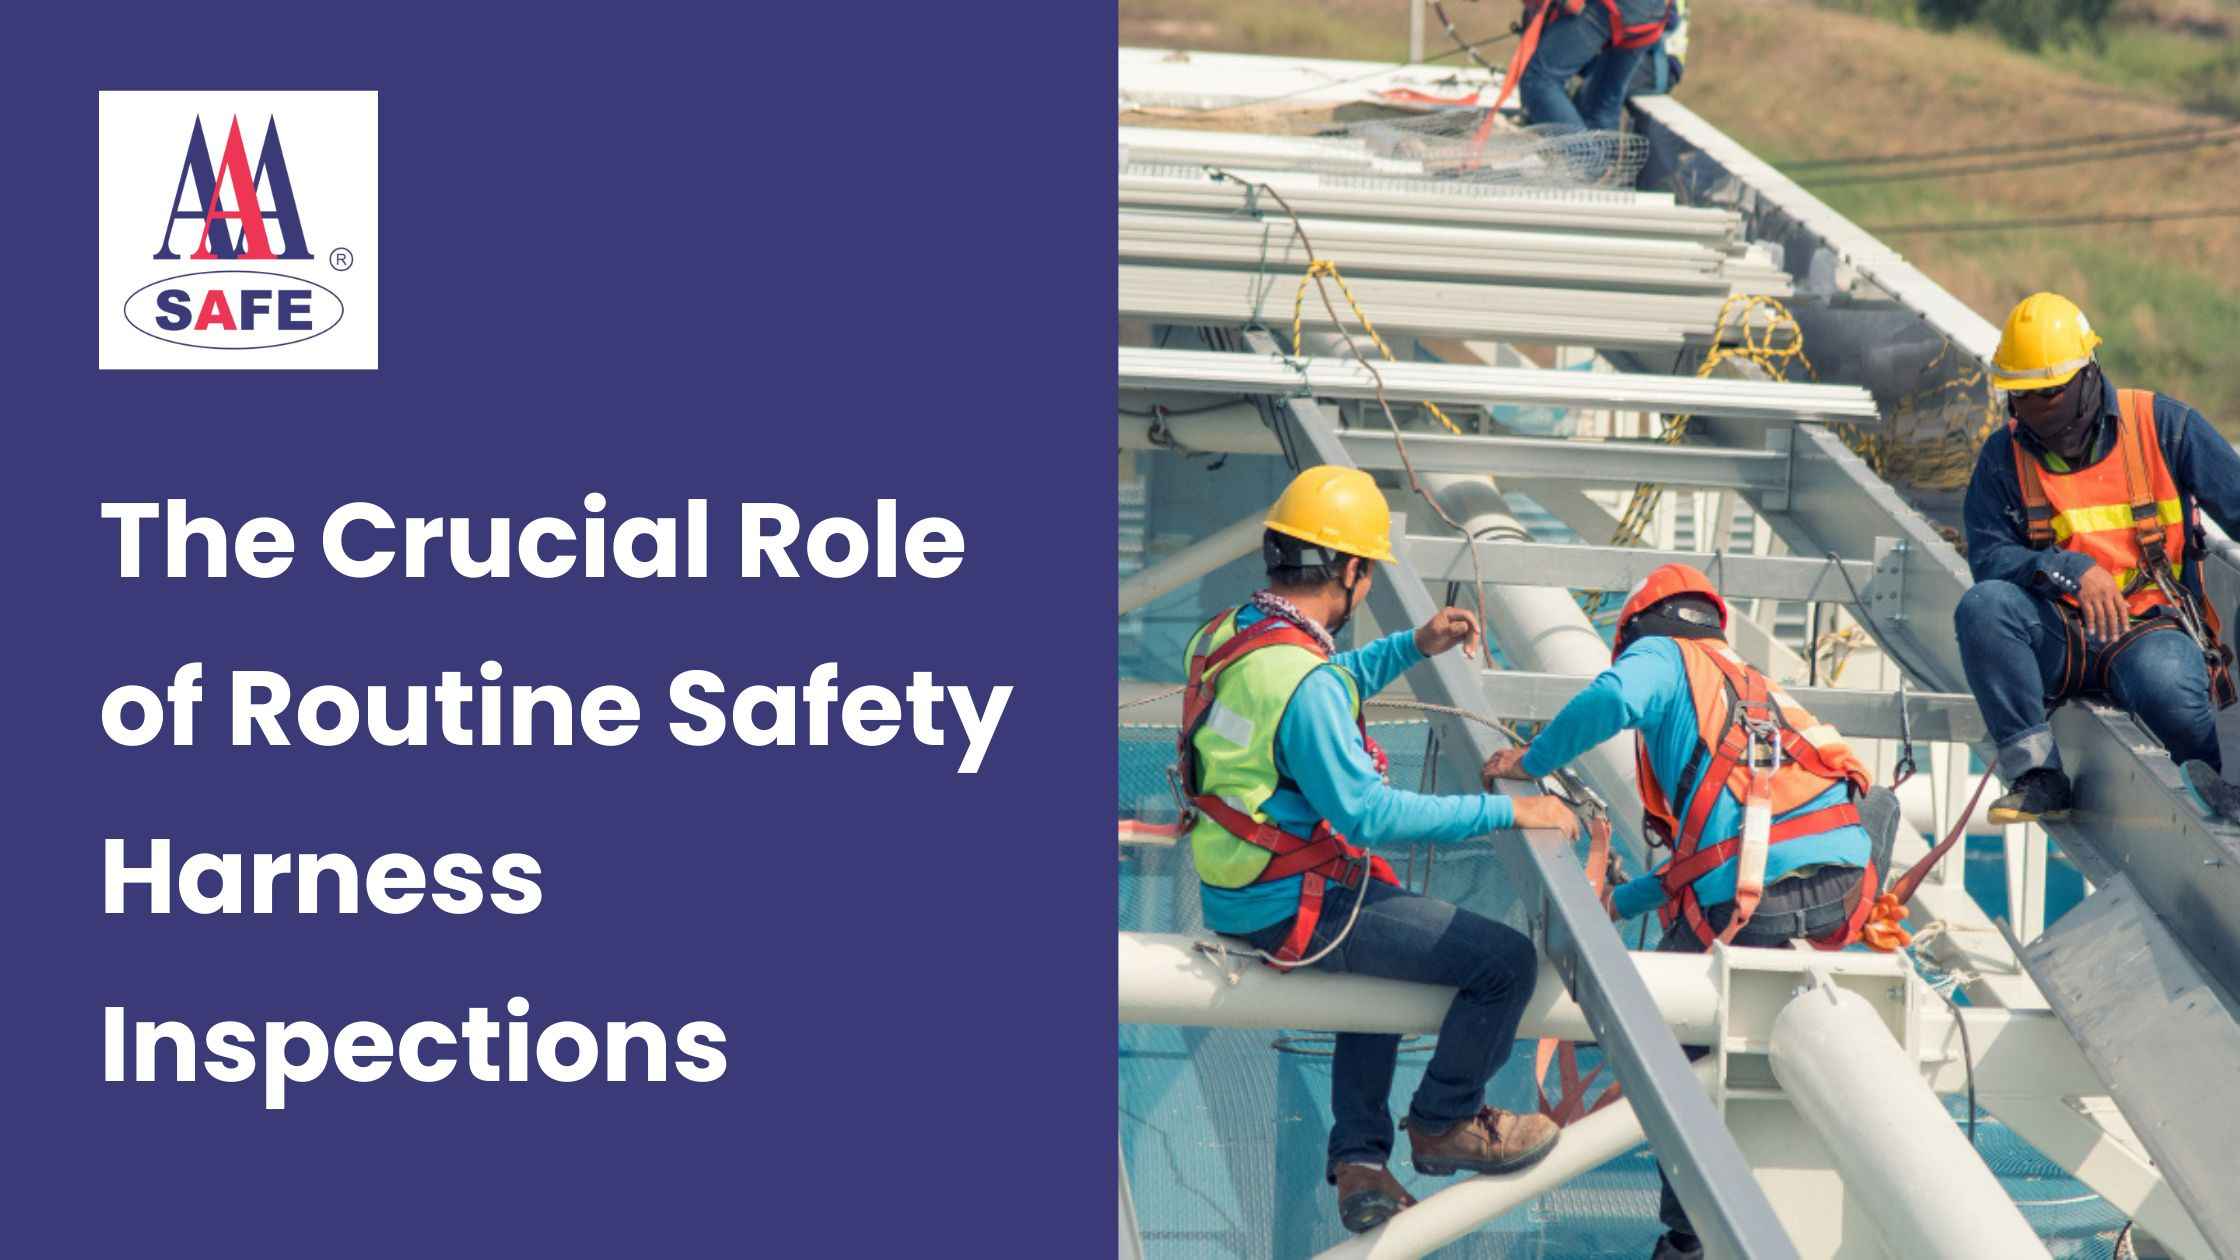 The Crucial Role of Routine Safety Harness Inspections